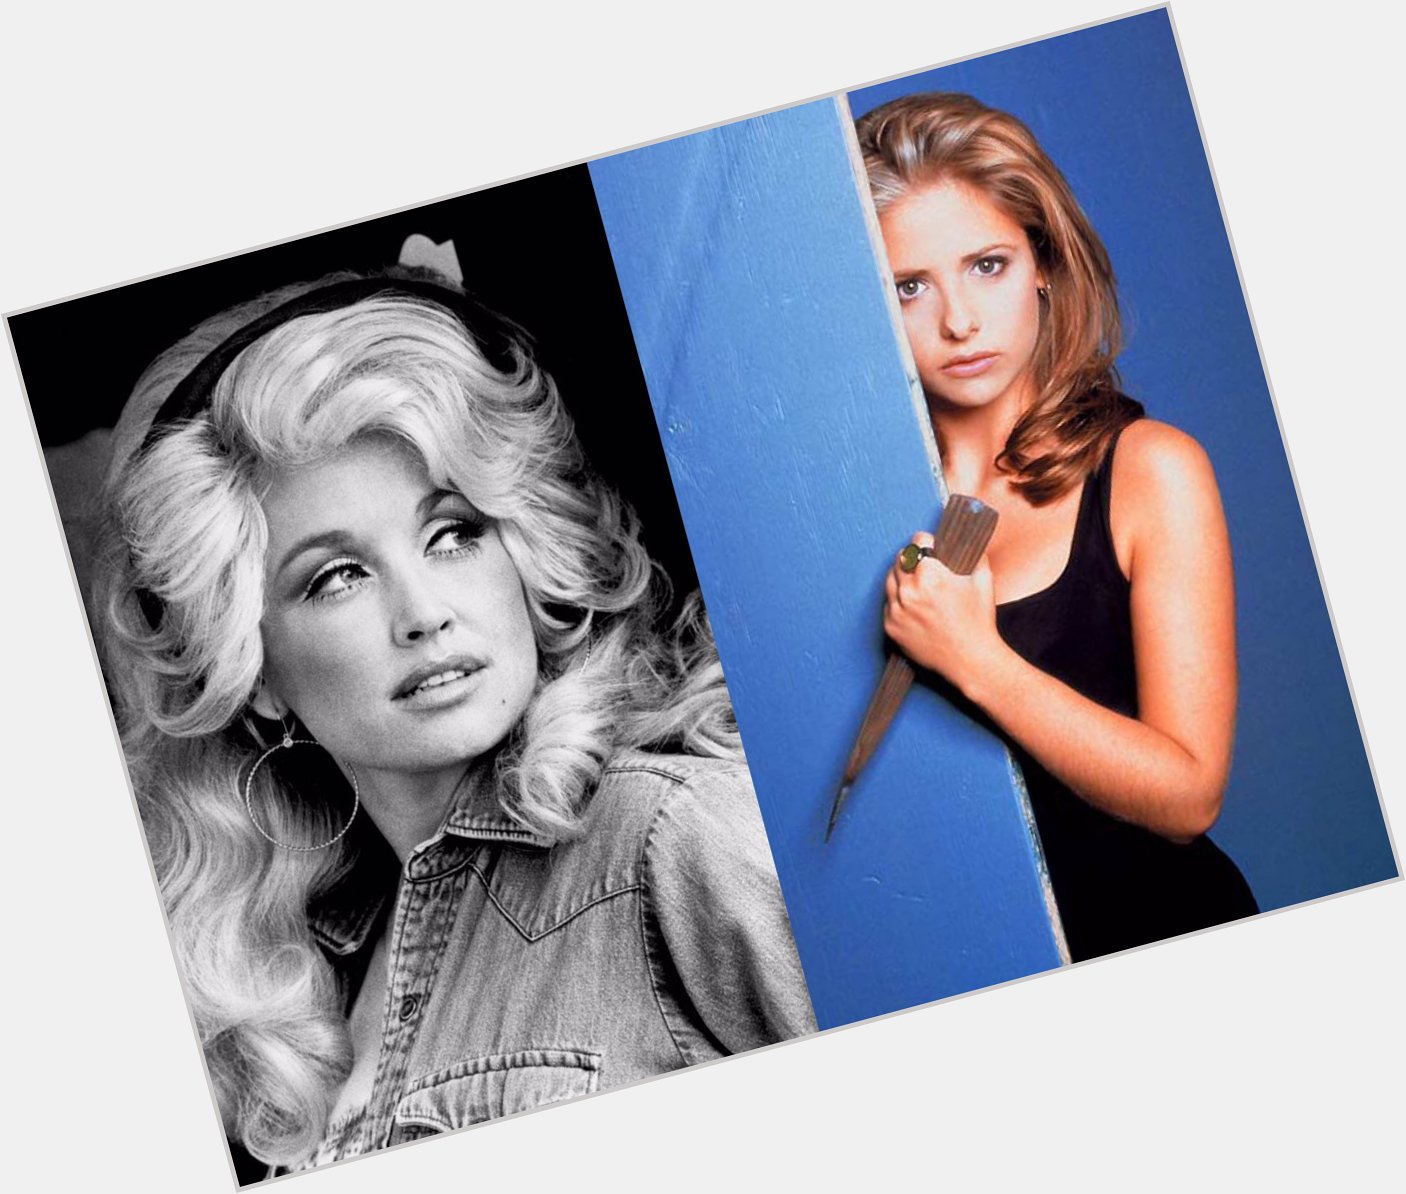 Happy Birthday my beautiful ladies!!
Dolly Parton and Buffy Summers  